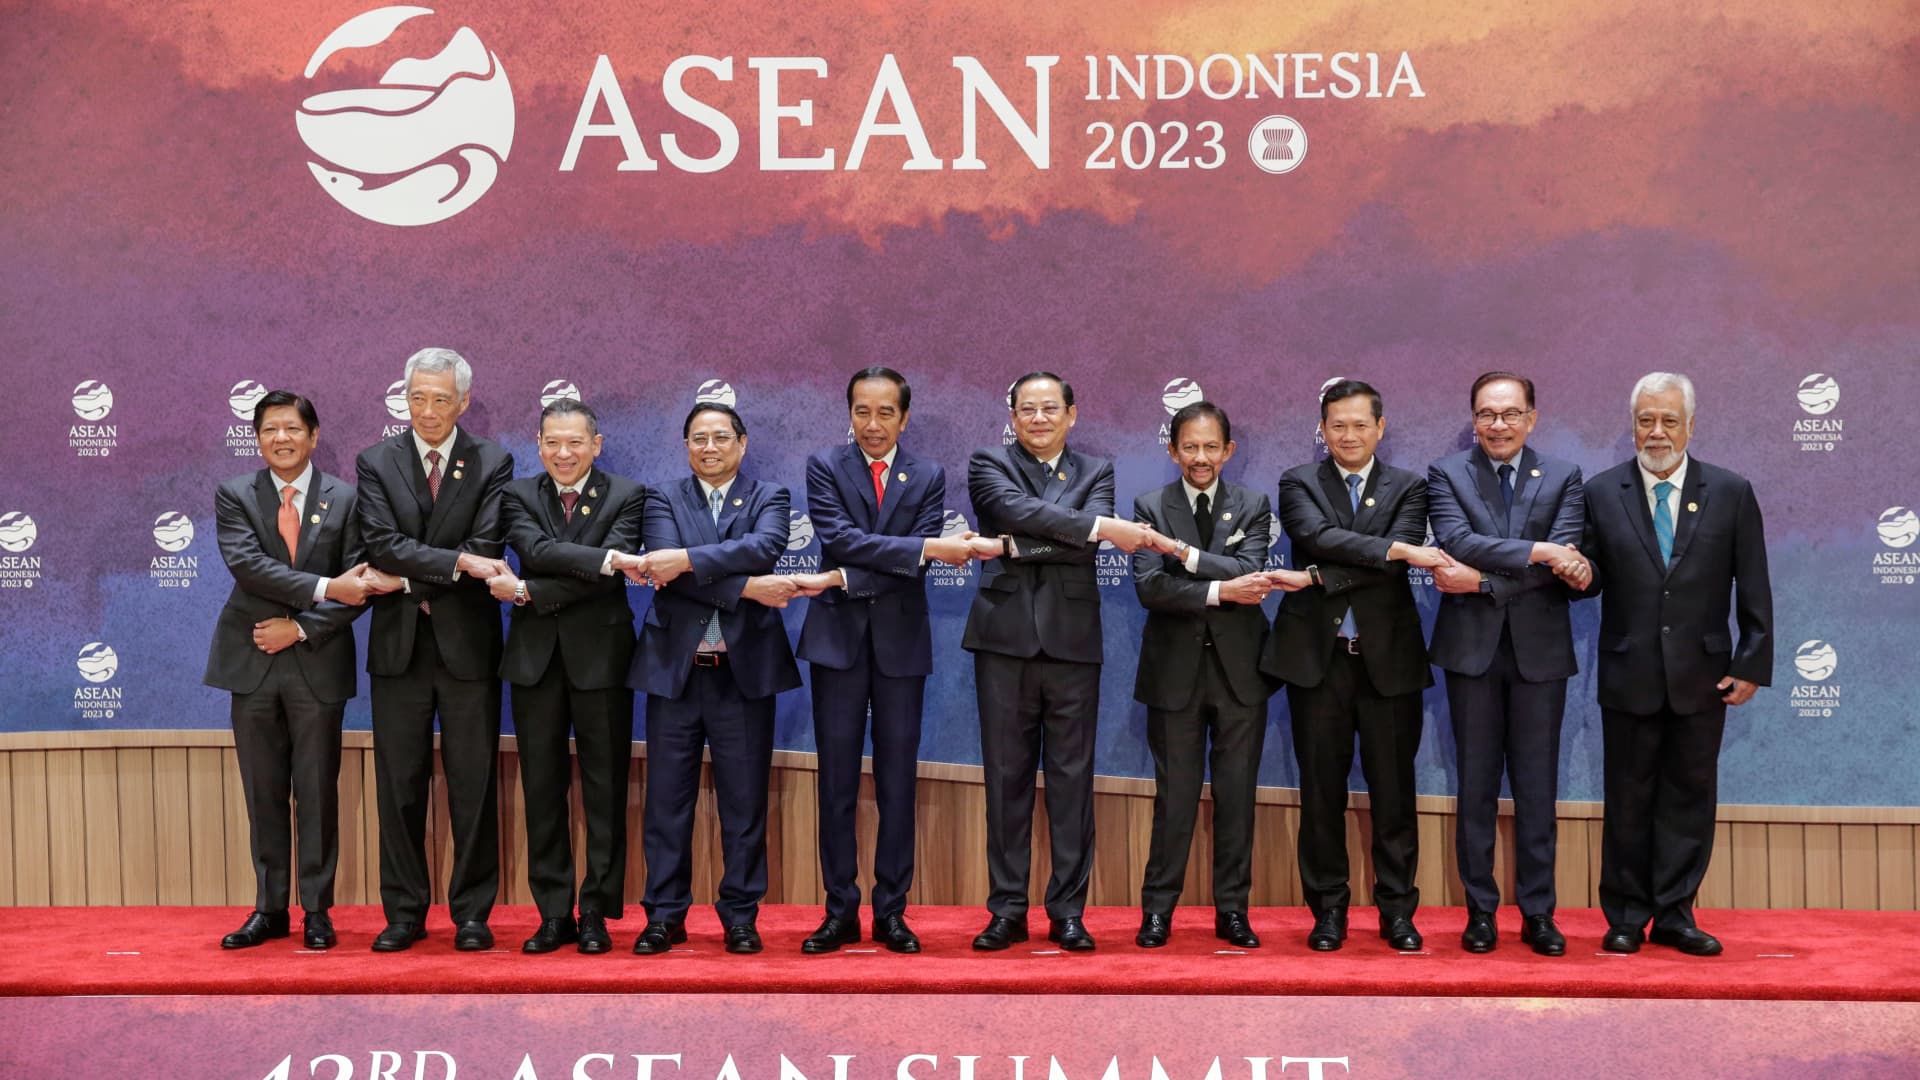 Myanmar won’t be allowed to lead ASEAN in 2026, in blow to generals